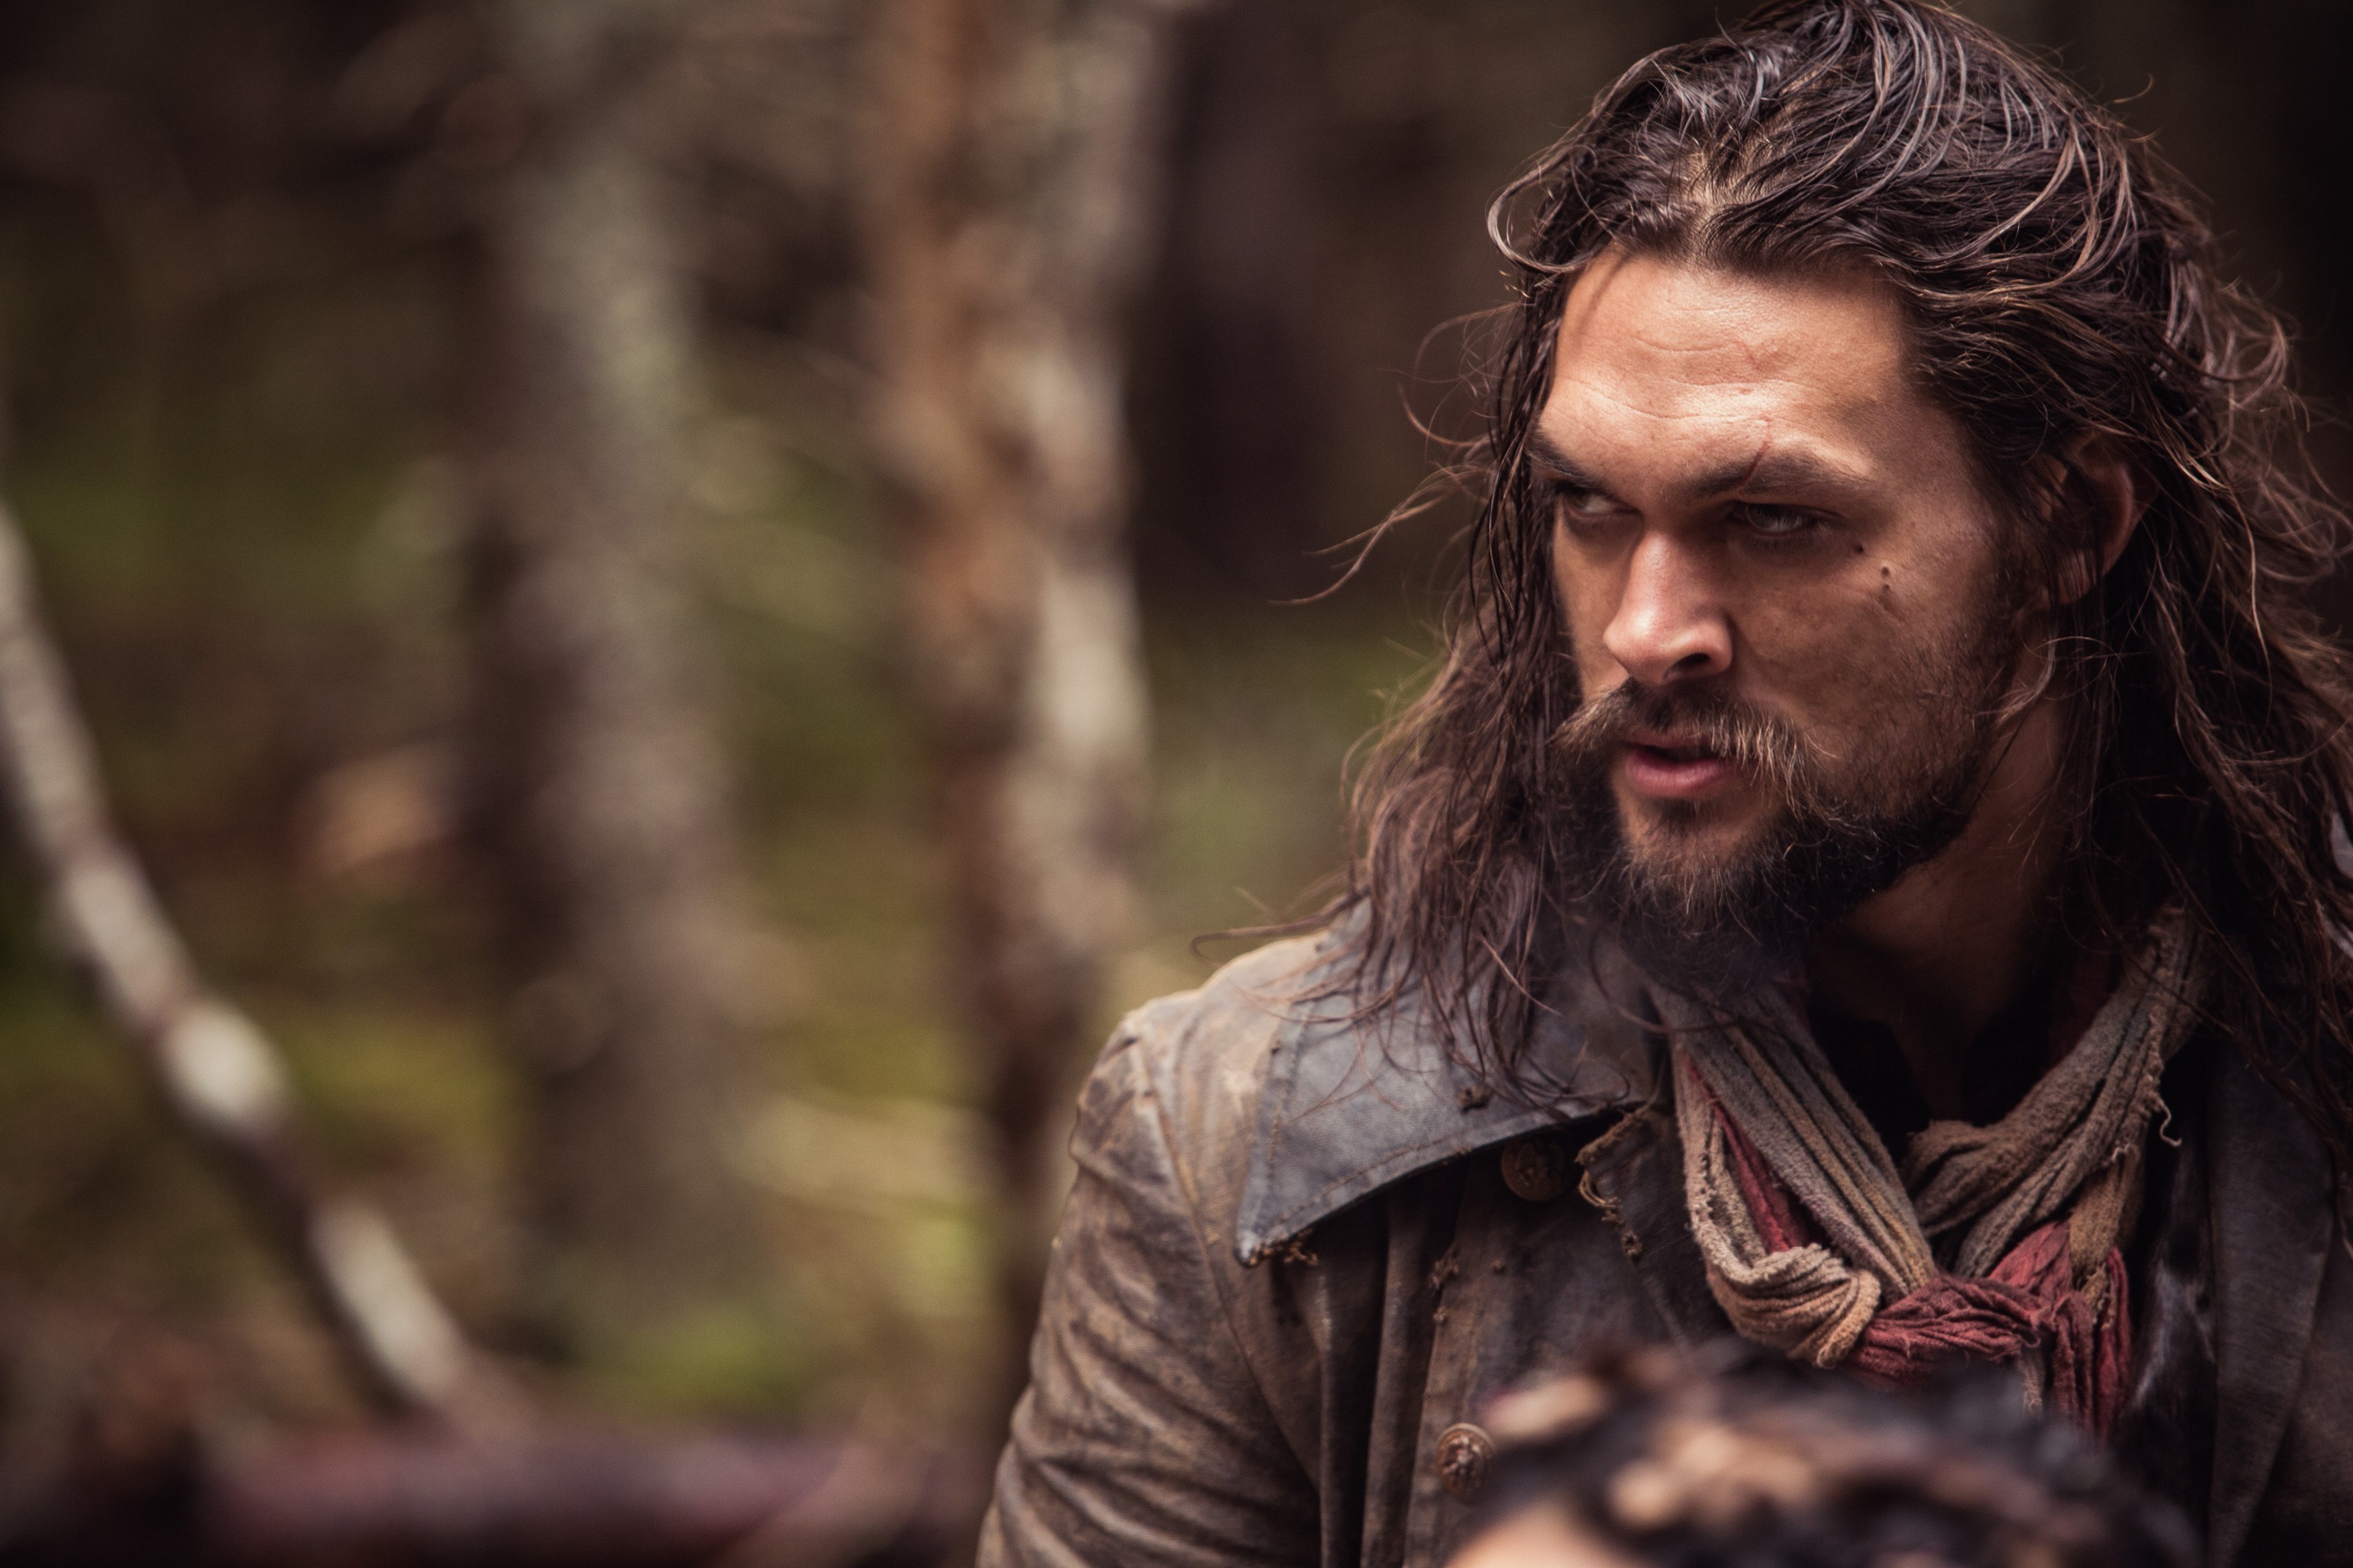 <p>Set in the 1700s, Netflix's "Frontier" tells the story of Declan Harp (played by Jason Momoa), an outlaw with big plans to break into the Canadian fur trade business, even if that means crossing the company that has exclusive control. Its third and final season debuted in 2018.</p>